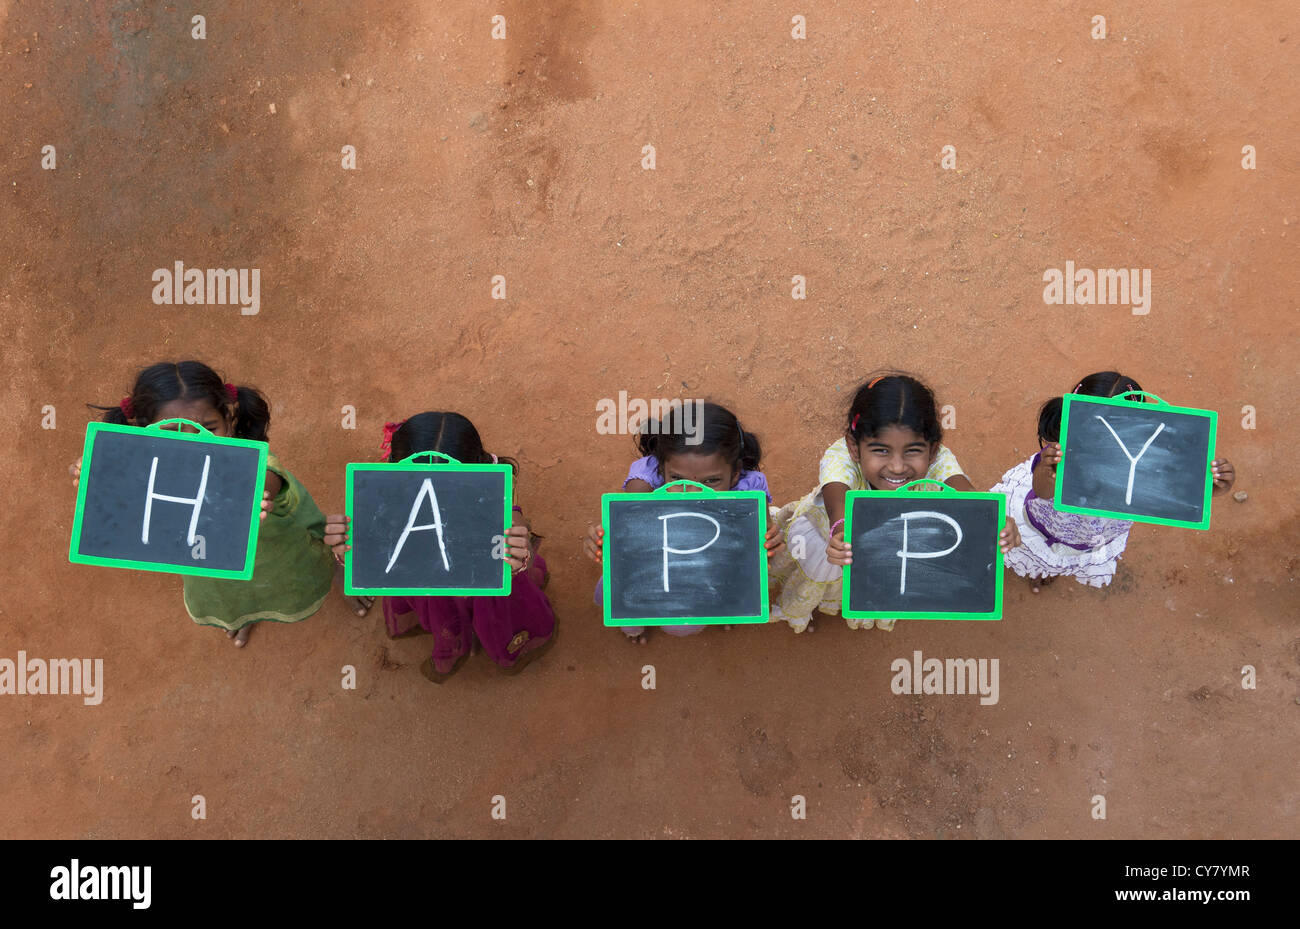 Five Indian village girls with HAPPY written on a chalkboard in a rural indian village. Andhra Pradesh, India Stock Photo